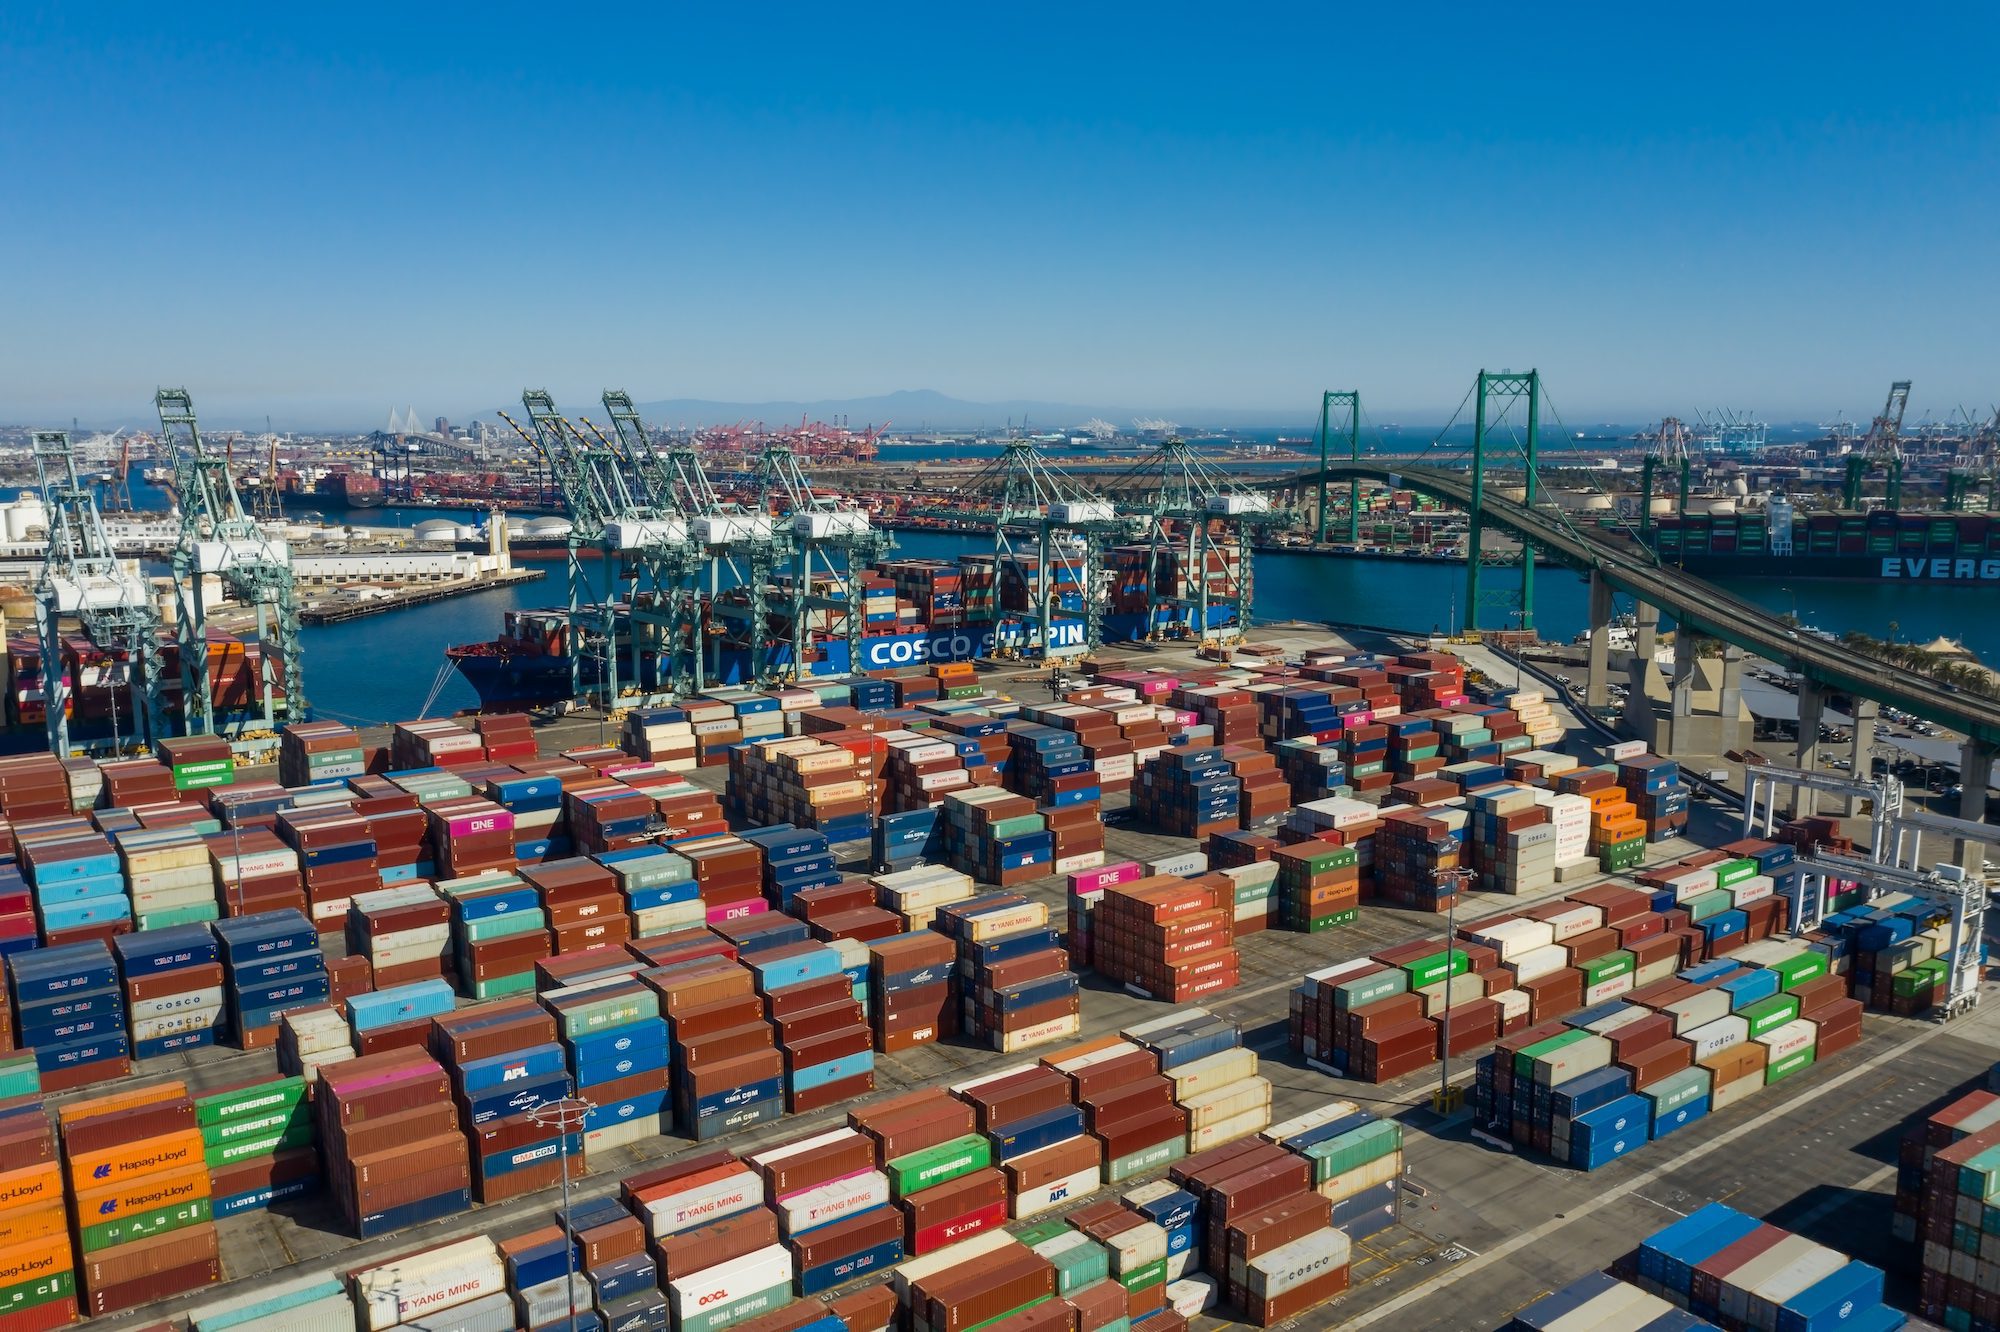 U.S. Retail Ports See Record Imports Ahead of Rising Costs and Supply Chain Disruptions, NRF Says